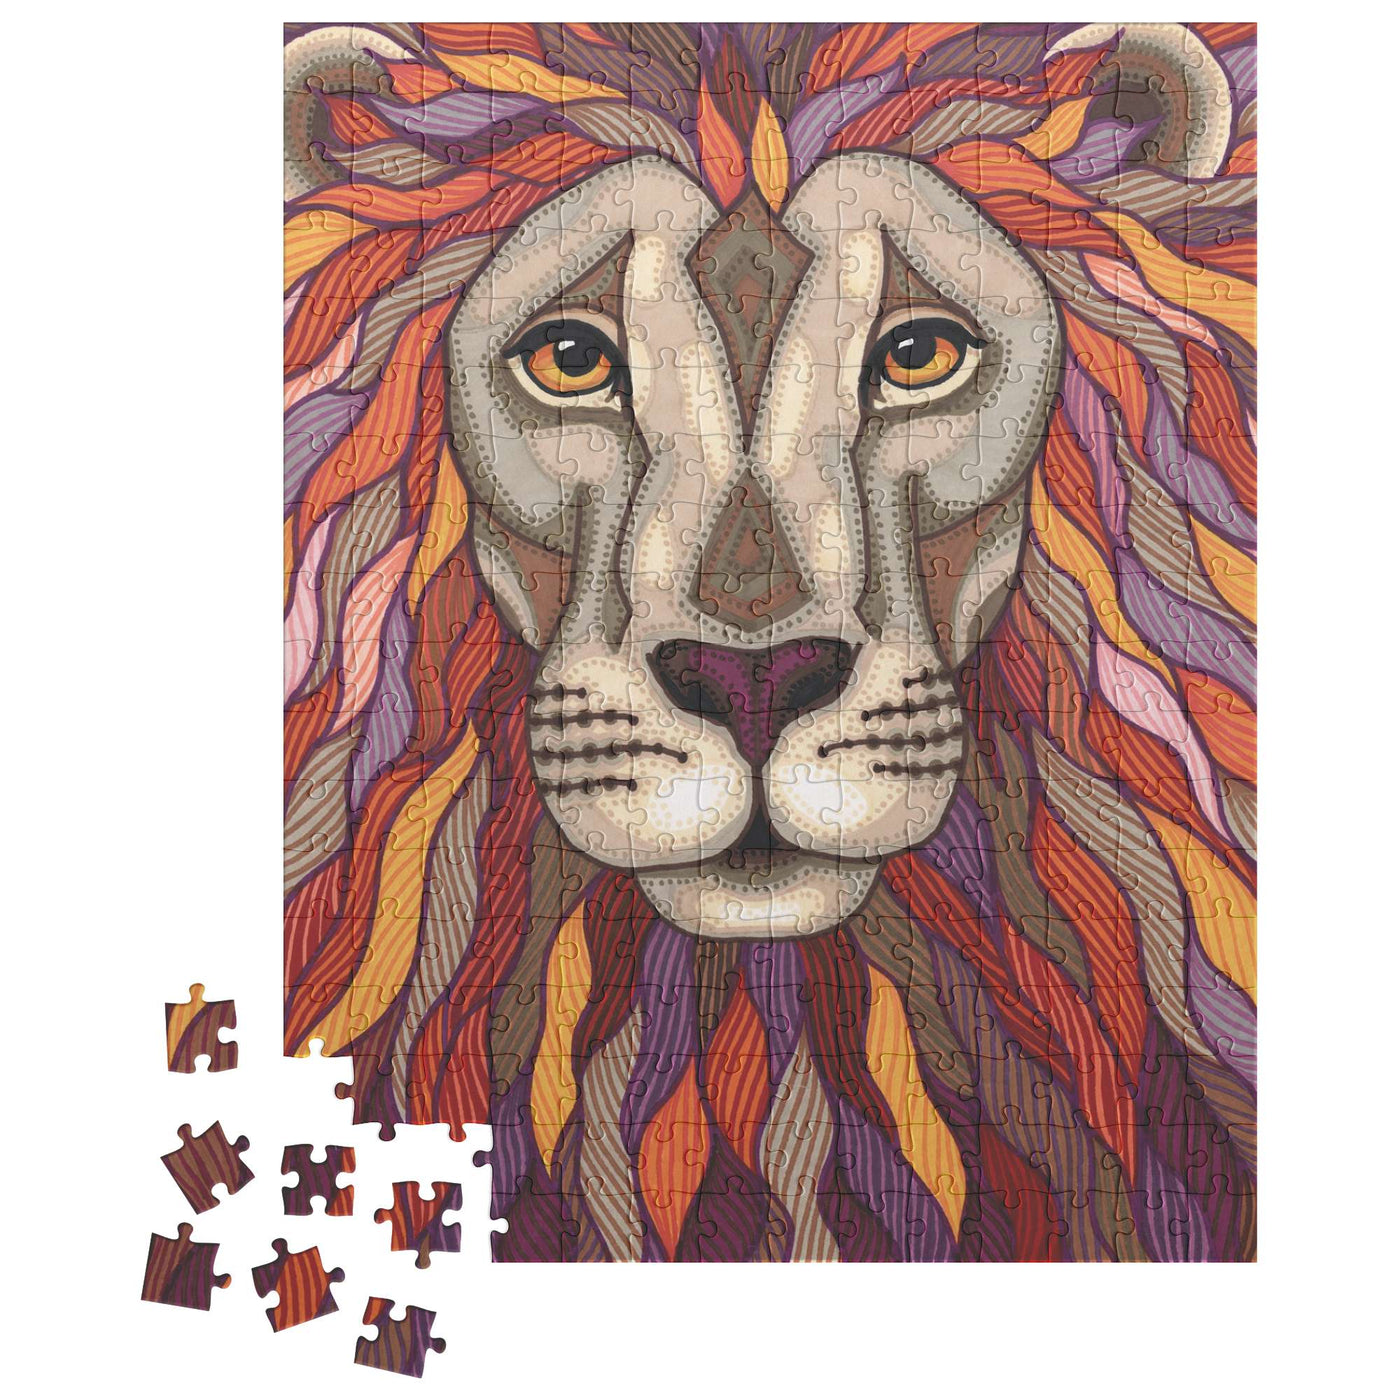 A Lion Pride Puzzle featuring a colorful, stylized lion with a mane in shades of orange, purple, and yellow. Several puzzle pieces are detached from the bottom left corner.